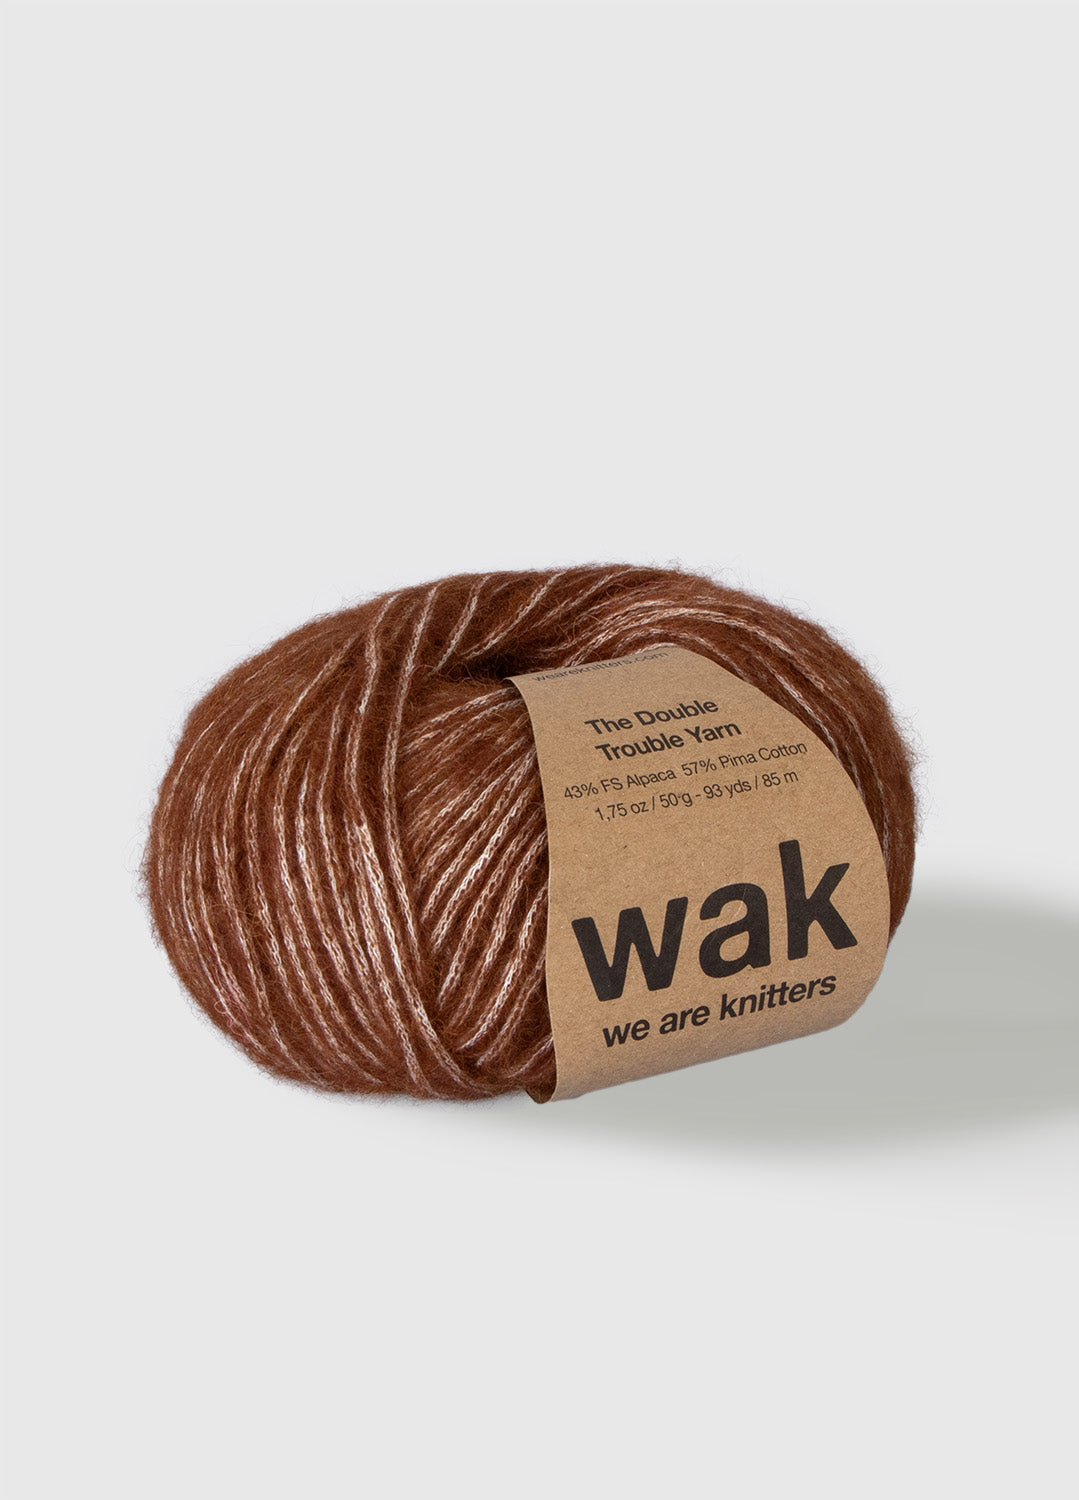 The Double Trouble Yarn Brown